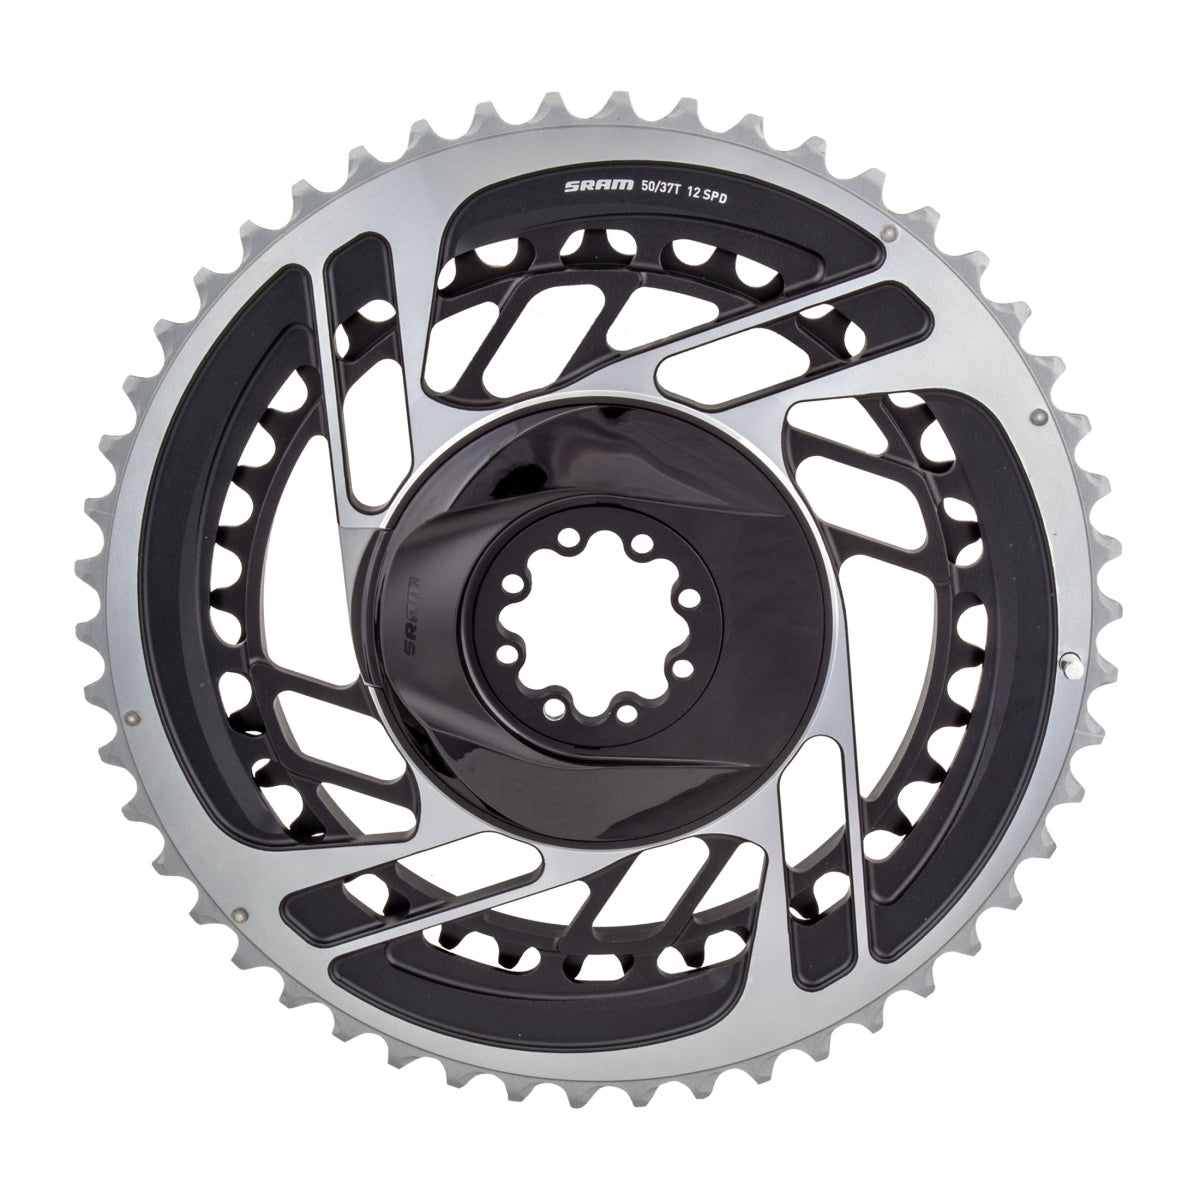 Chainring Sram 50/37T Dm Red Gy – Velo Mine